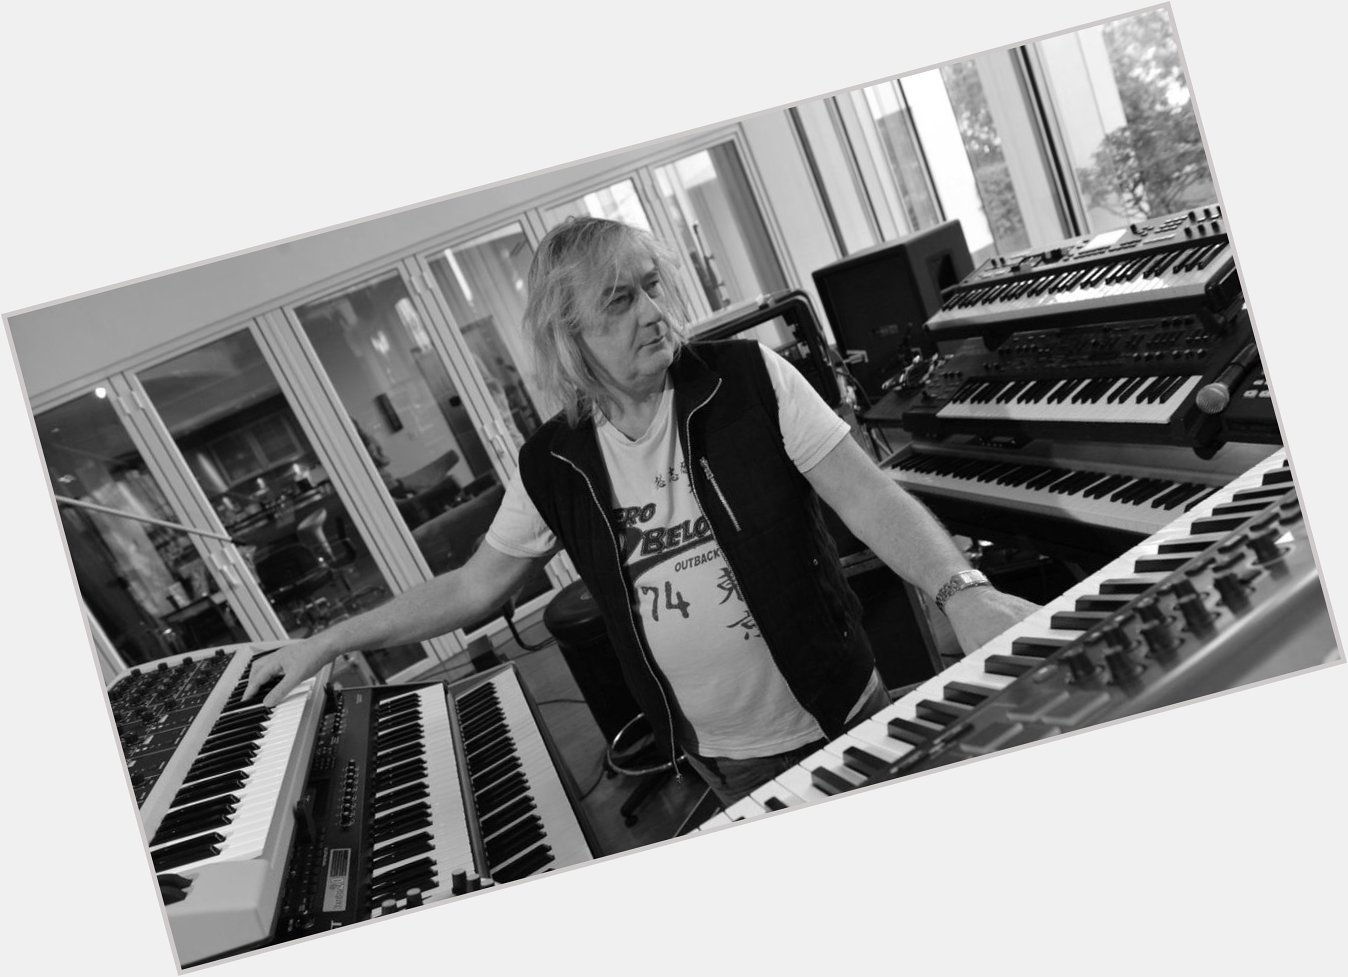 Happy birthday to Geoff Downes, who is 65 today! 